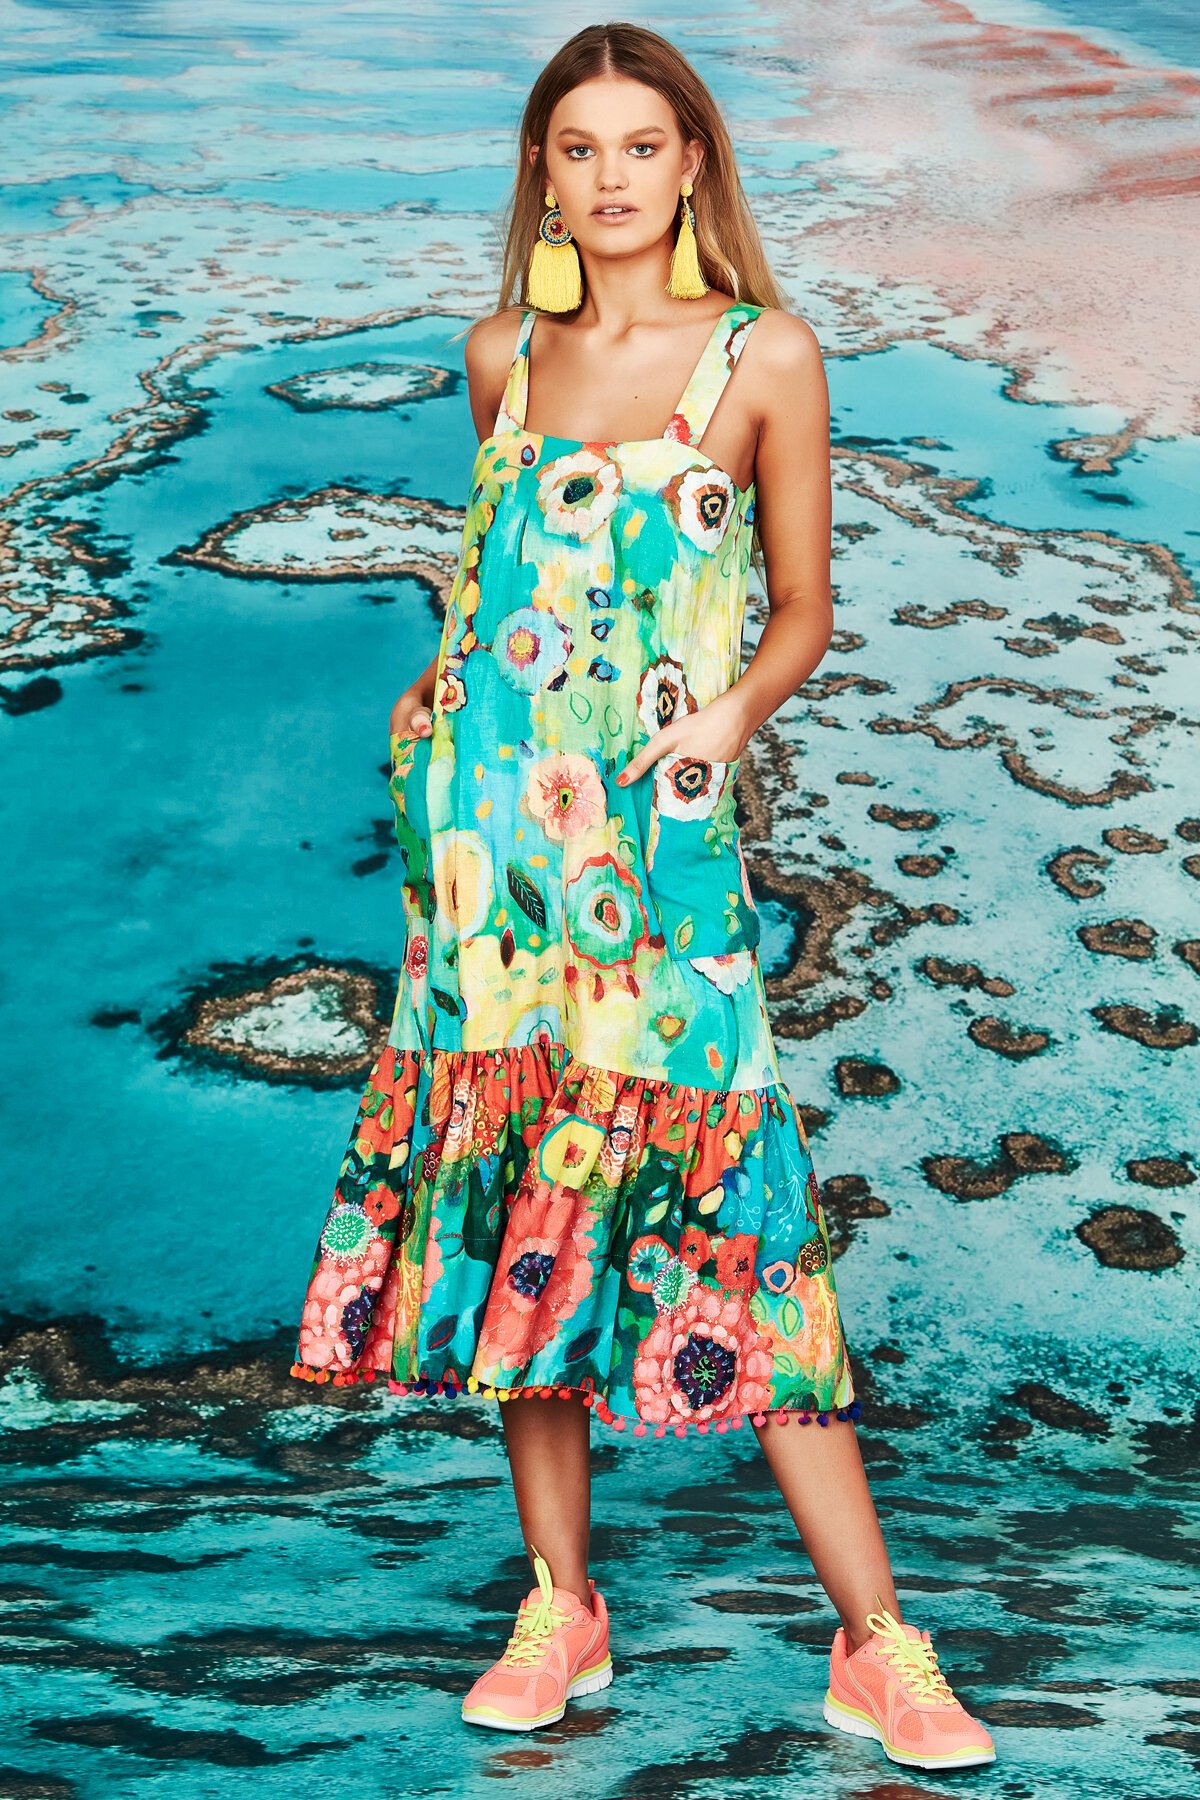 ALL IN SUN Dress - Curate : Trelise Cooper Online - JUST AFTER SUNSET ...